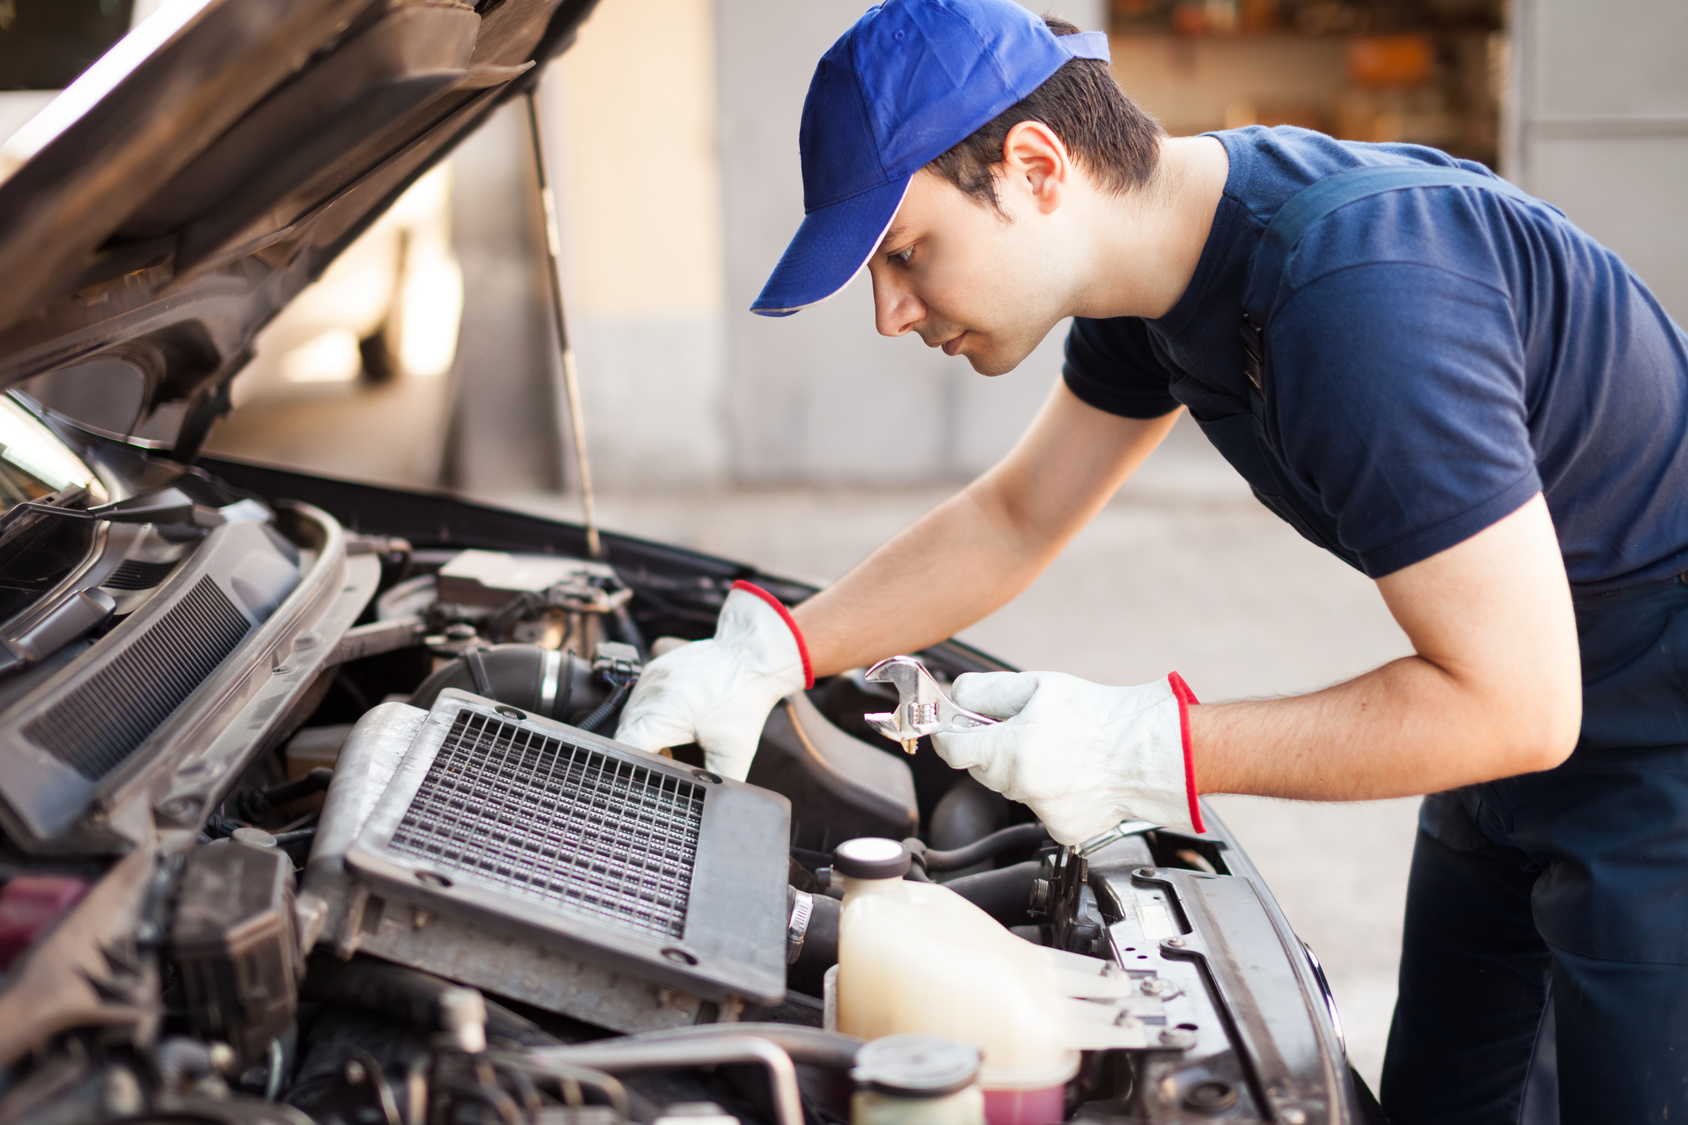 Own A Seldom-Used Vehicle? Use These Maintenance Tips